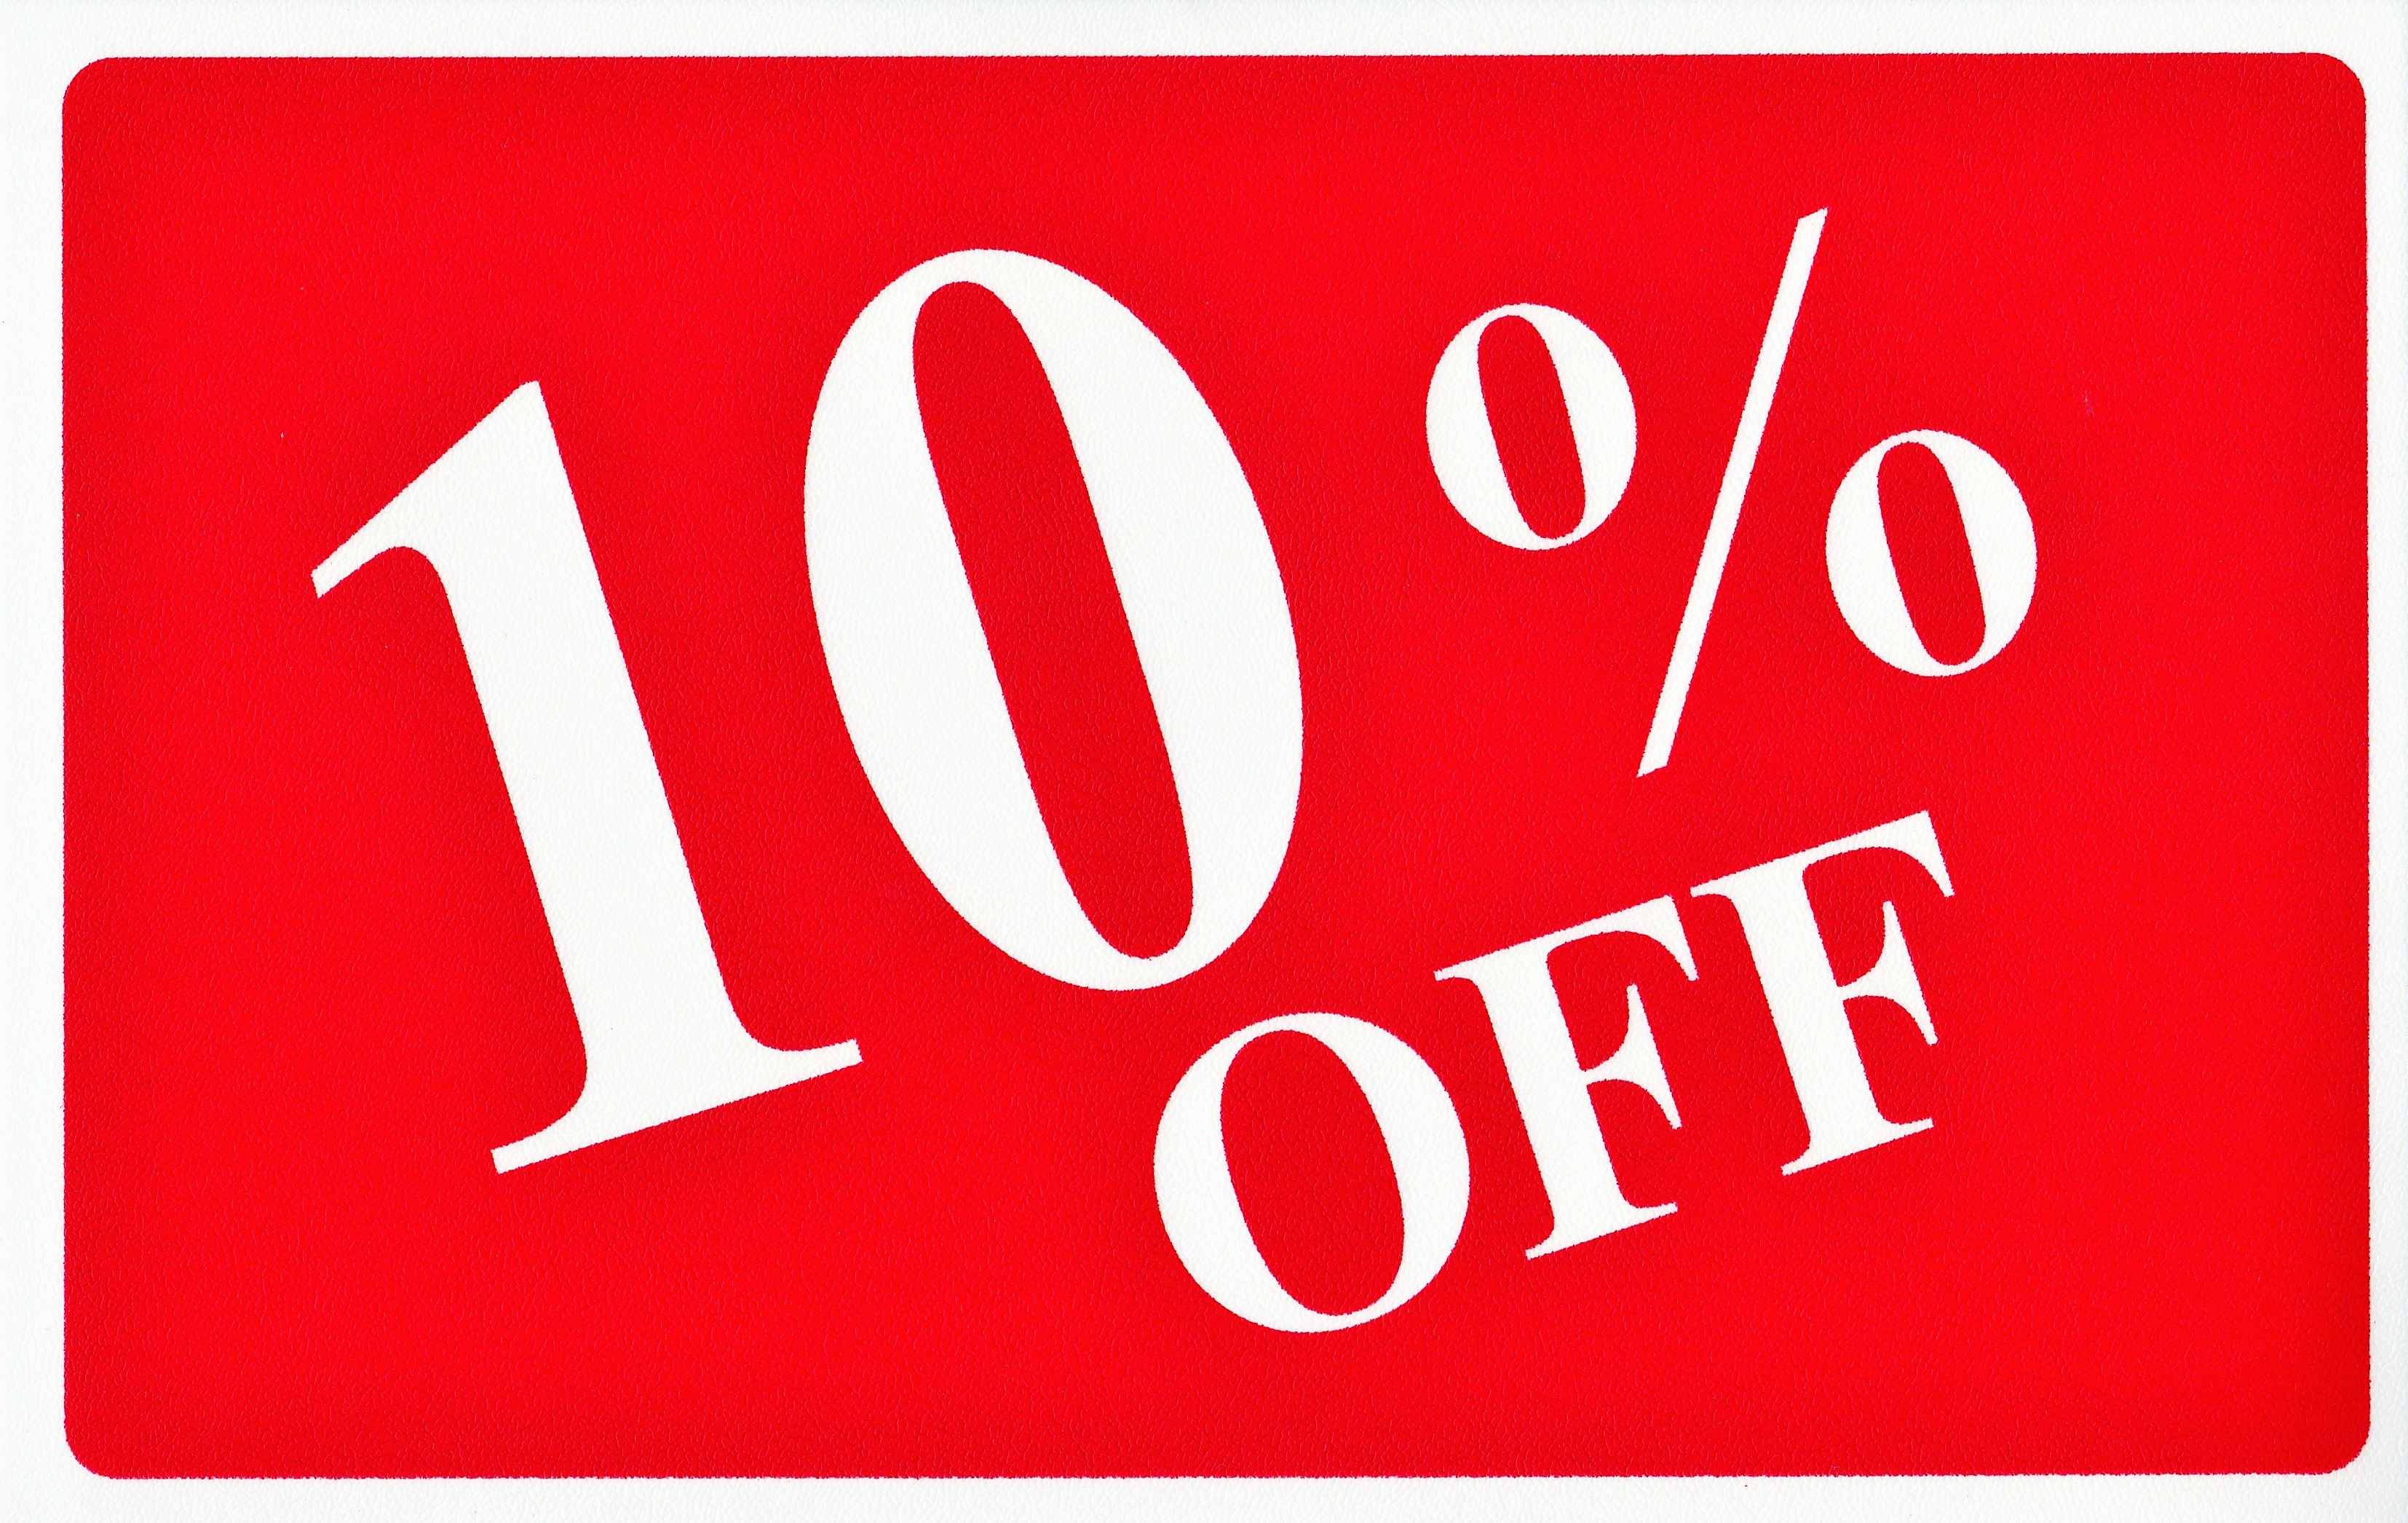 Pricing Sign: 10% OFF